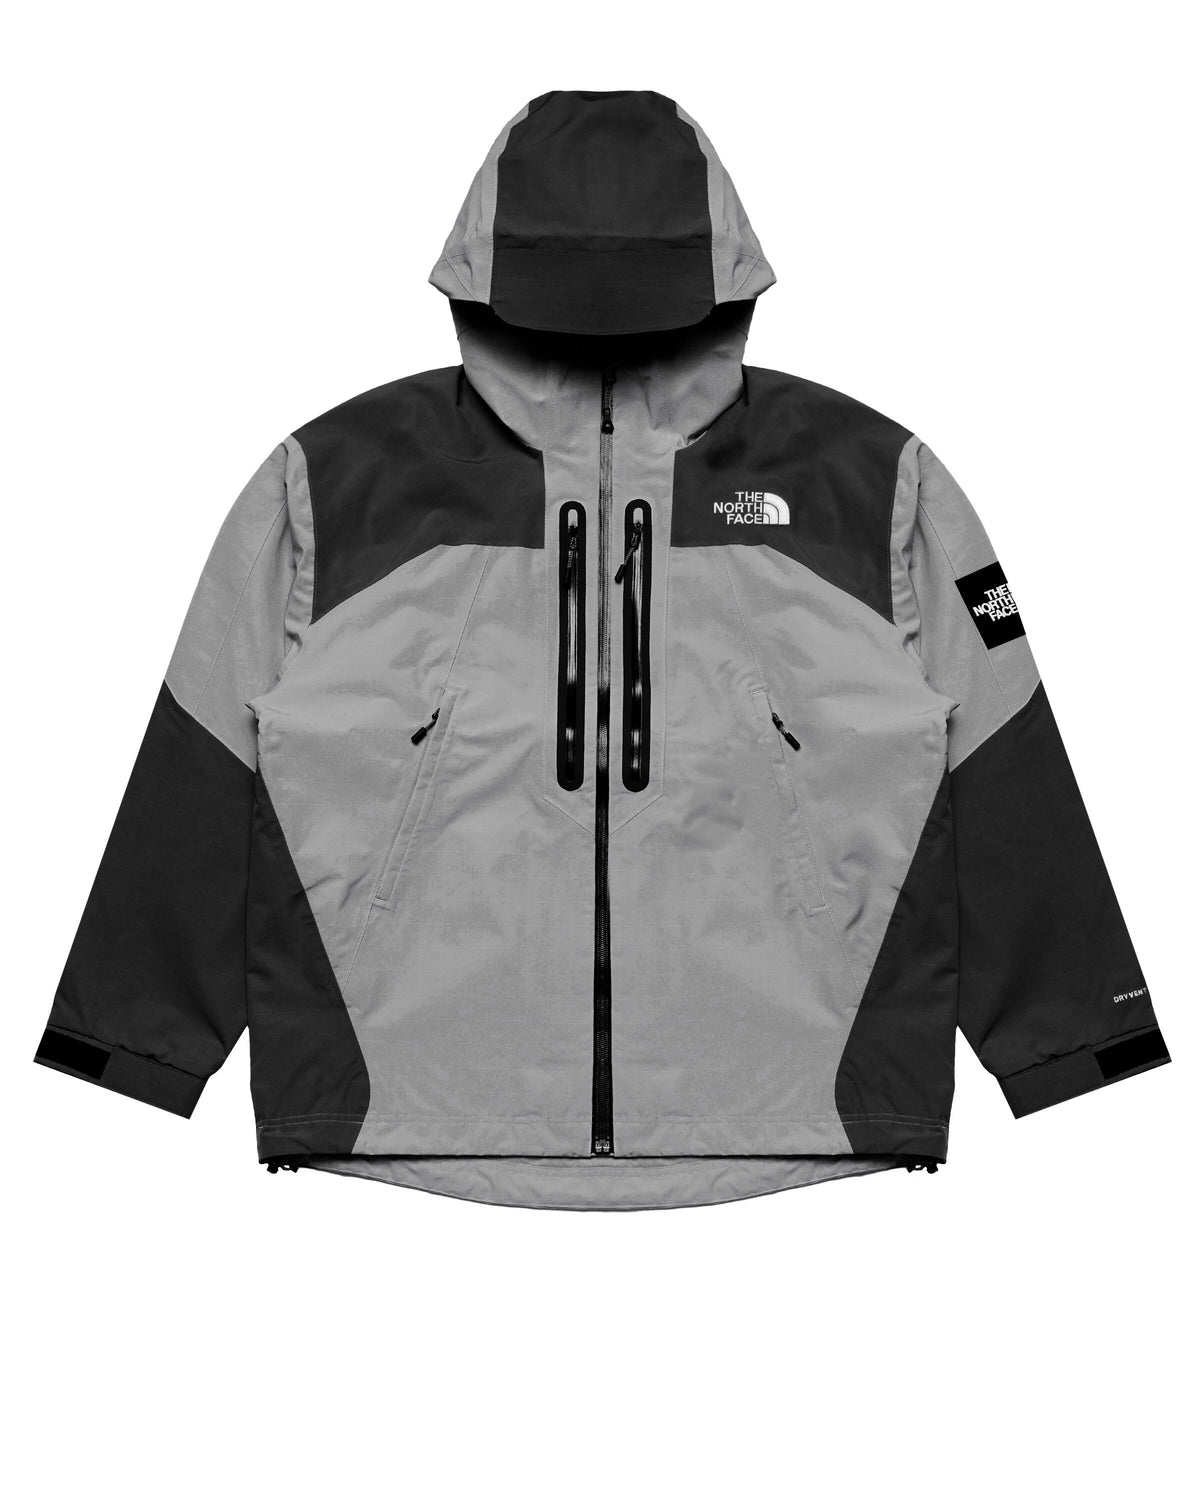 The North Face TRANSVERSE 2 LAYER DRYVENT JACKET